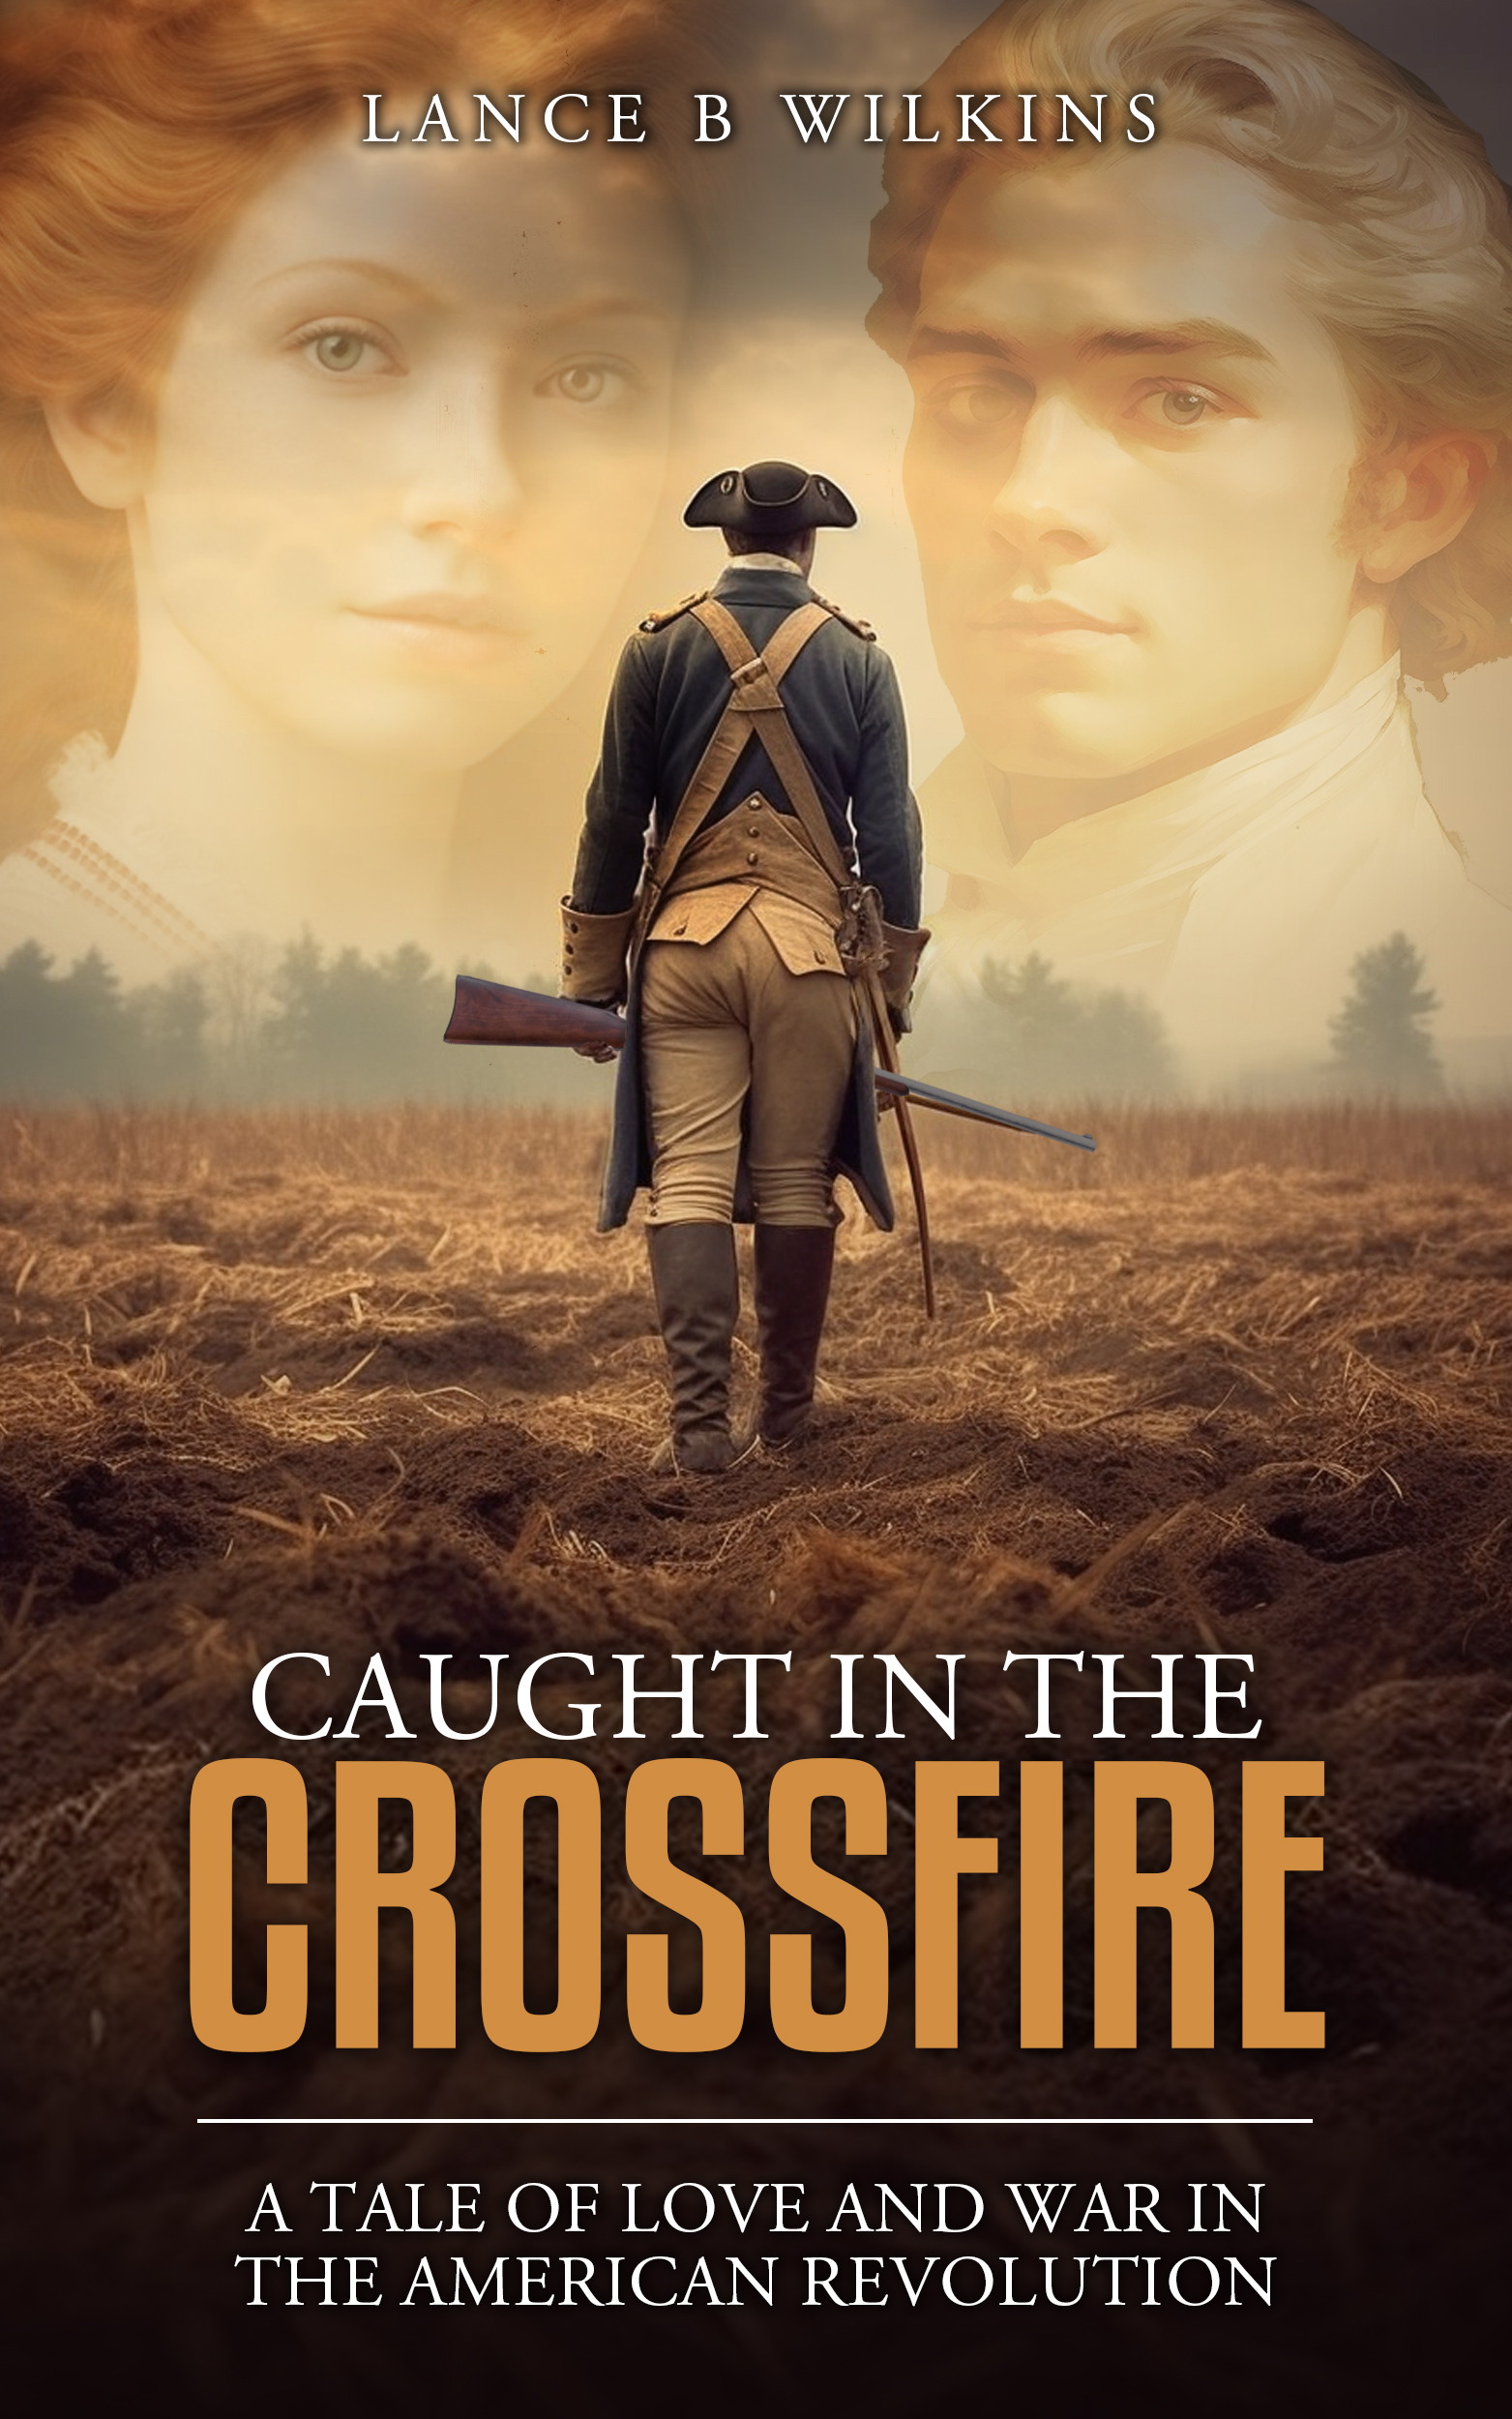 Caught in the Crossfire by Lance B. Wilkins